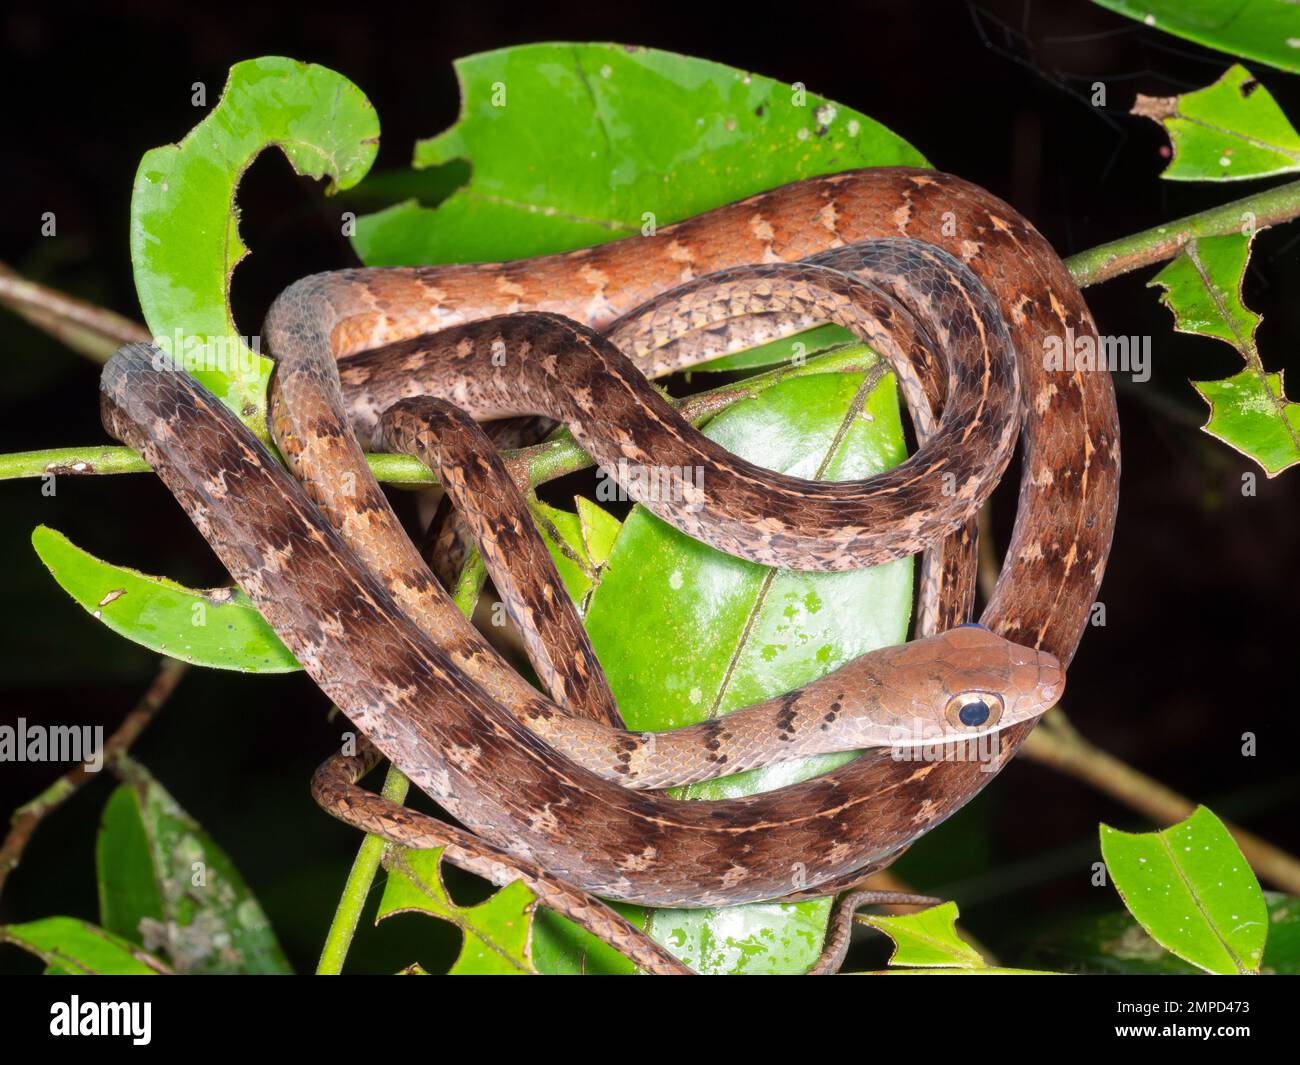 Olive Forest Racer (Dendrophidion dendrophis) resting at night in a rainforest shrub, Orellana province, Ecuador Stock Photo